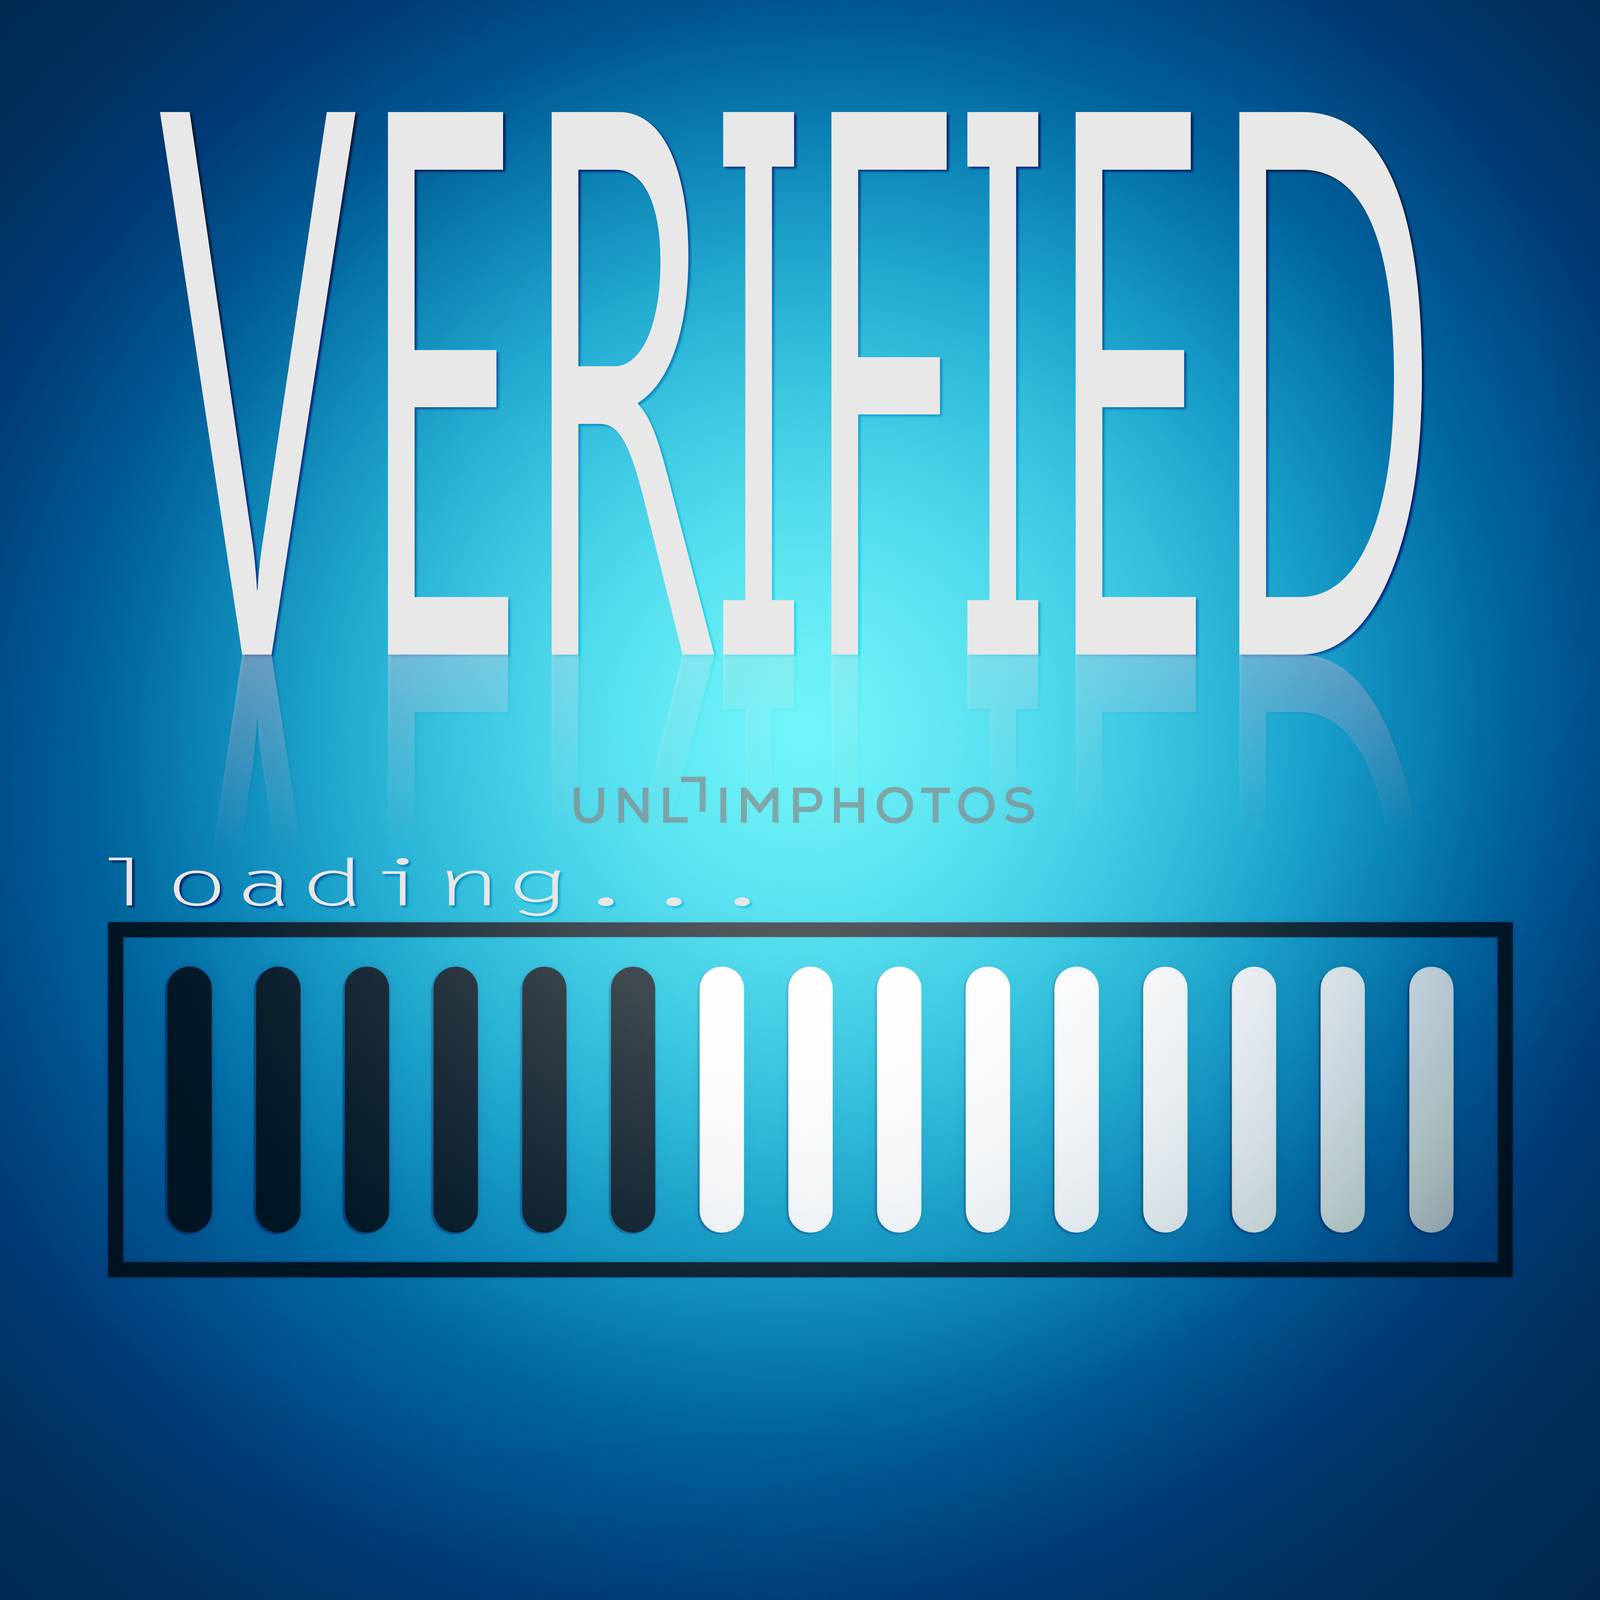 Verified word with blue loading bar by tang90246